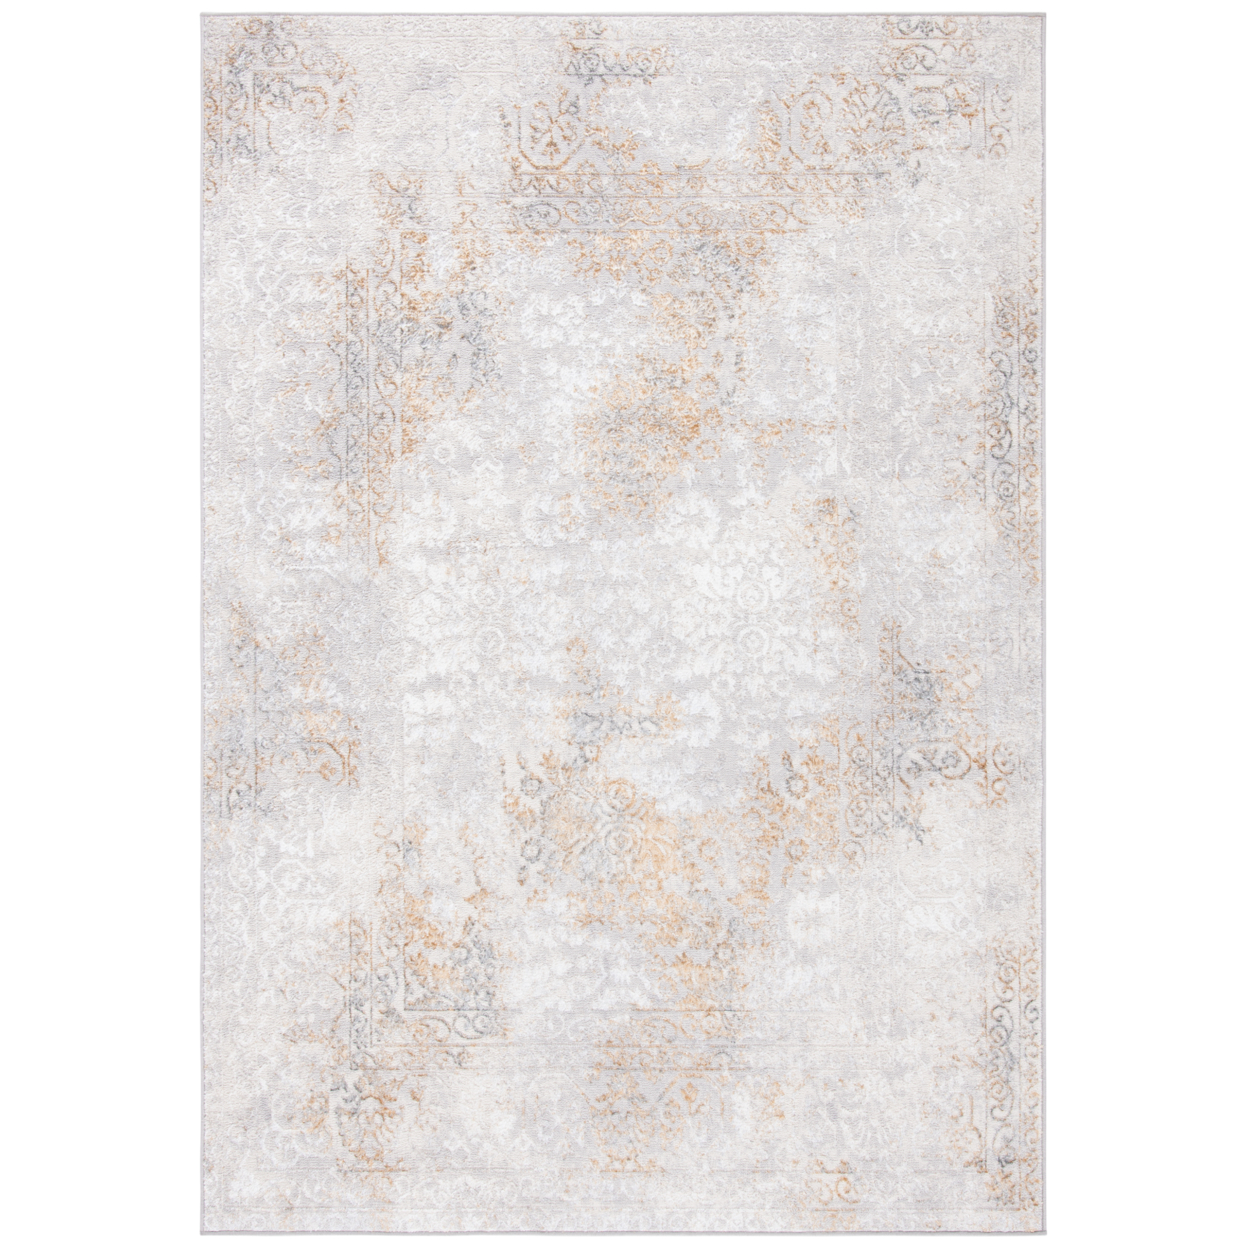 SAFAVIEH Orchard Collection ORC684G Grey / Gold Rug - 5-5 X 7-7